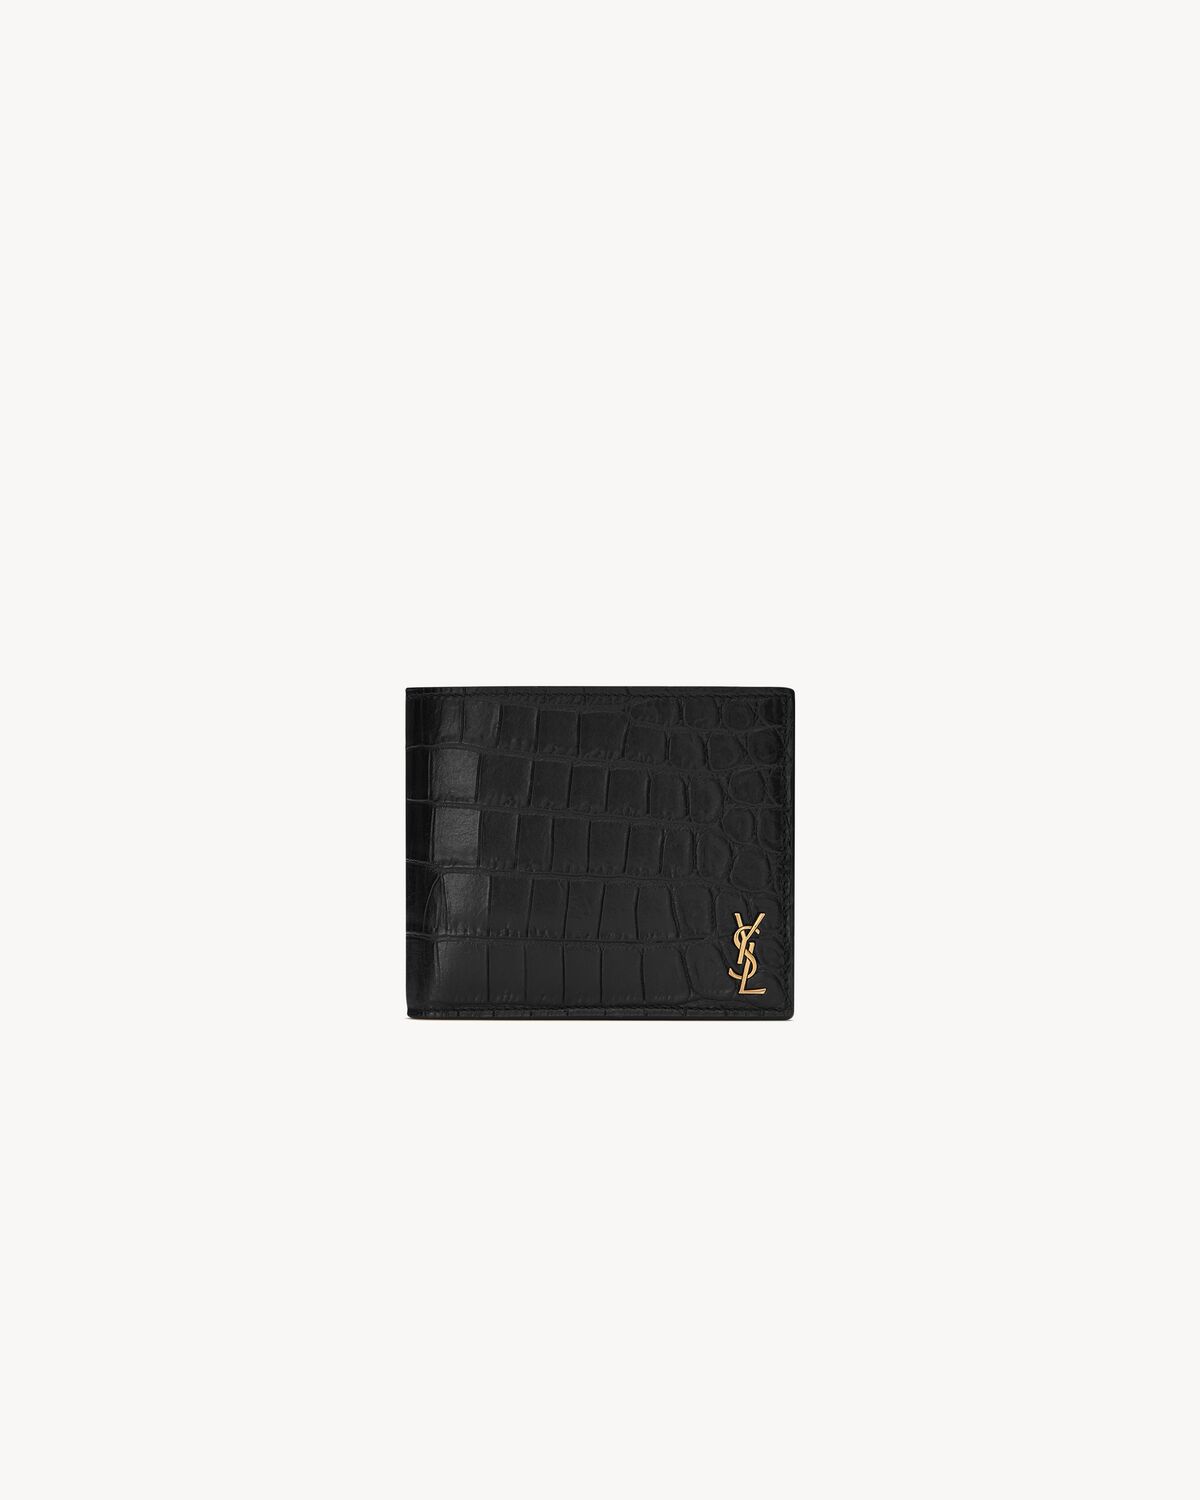 TINY CASSANDRE East/West wallet in CROCODILE-EMBOSSED matte leather